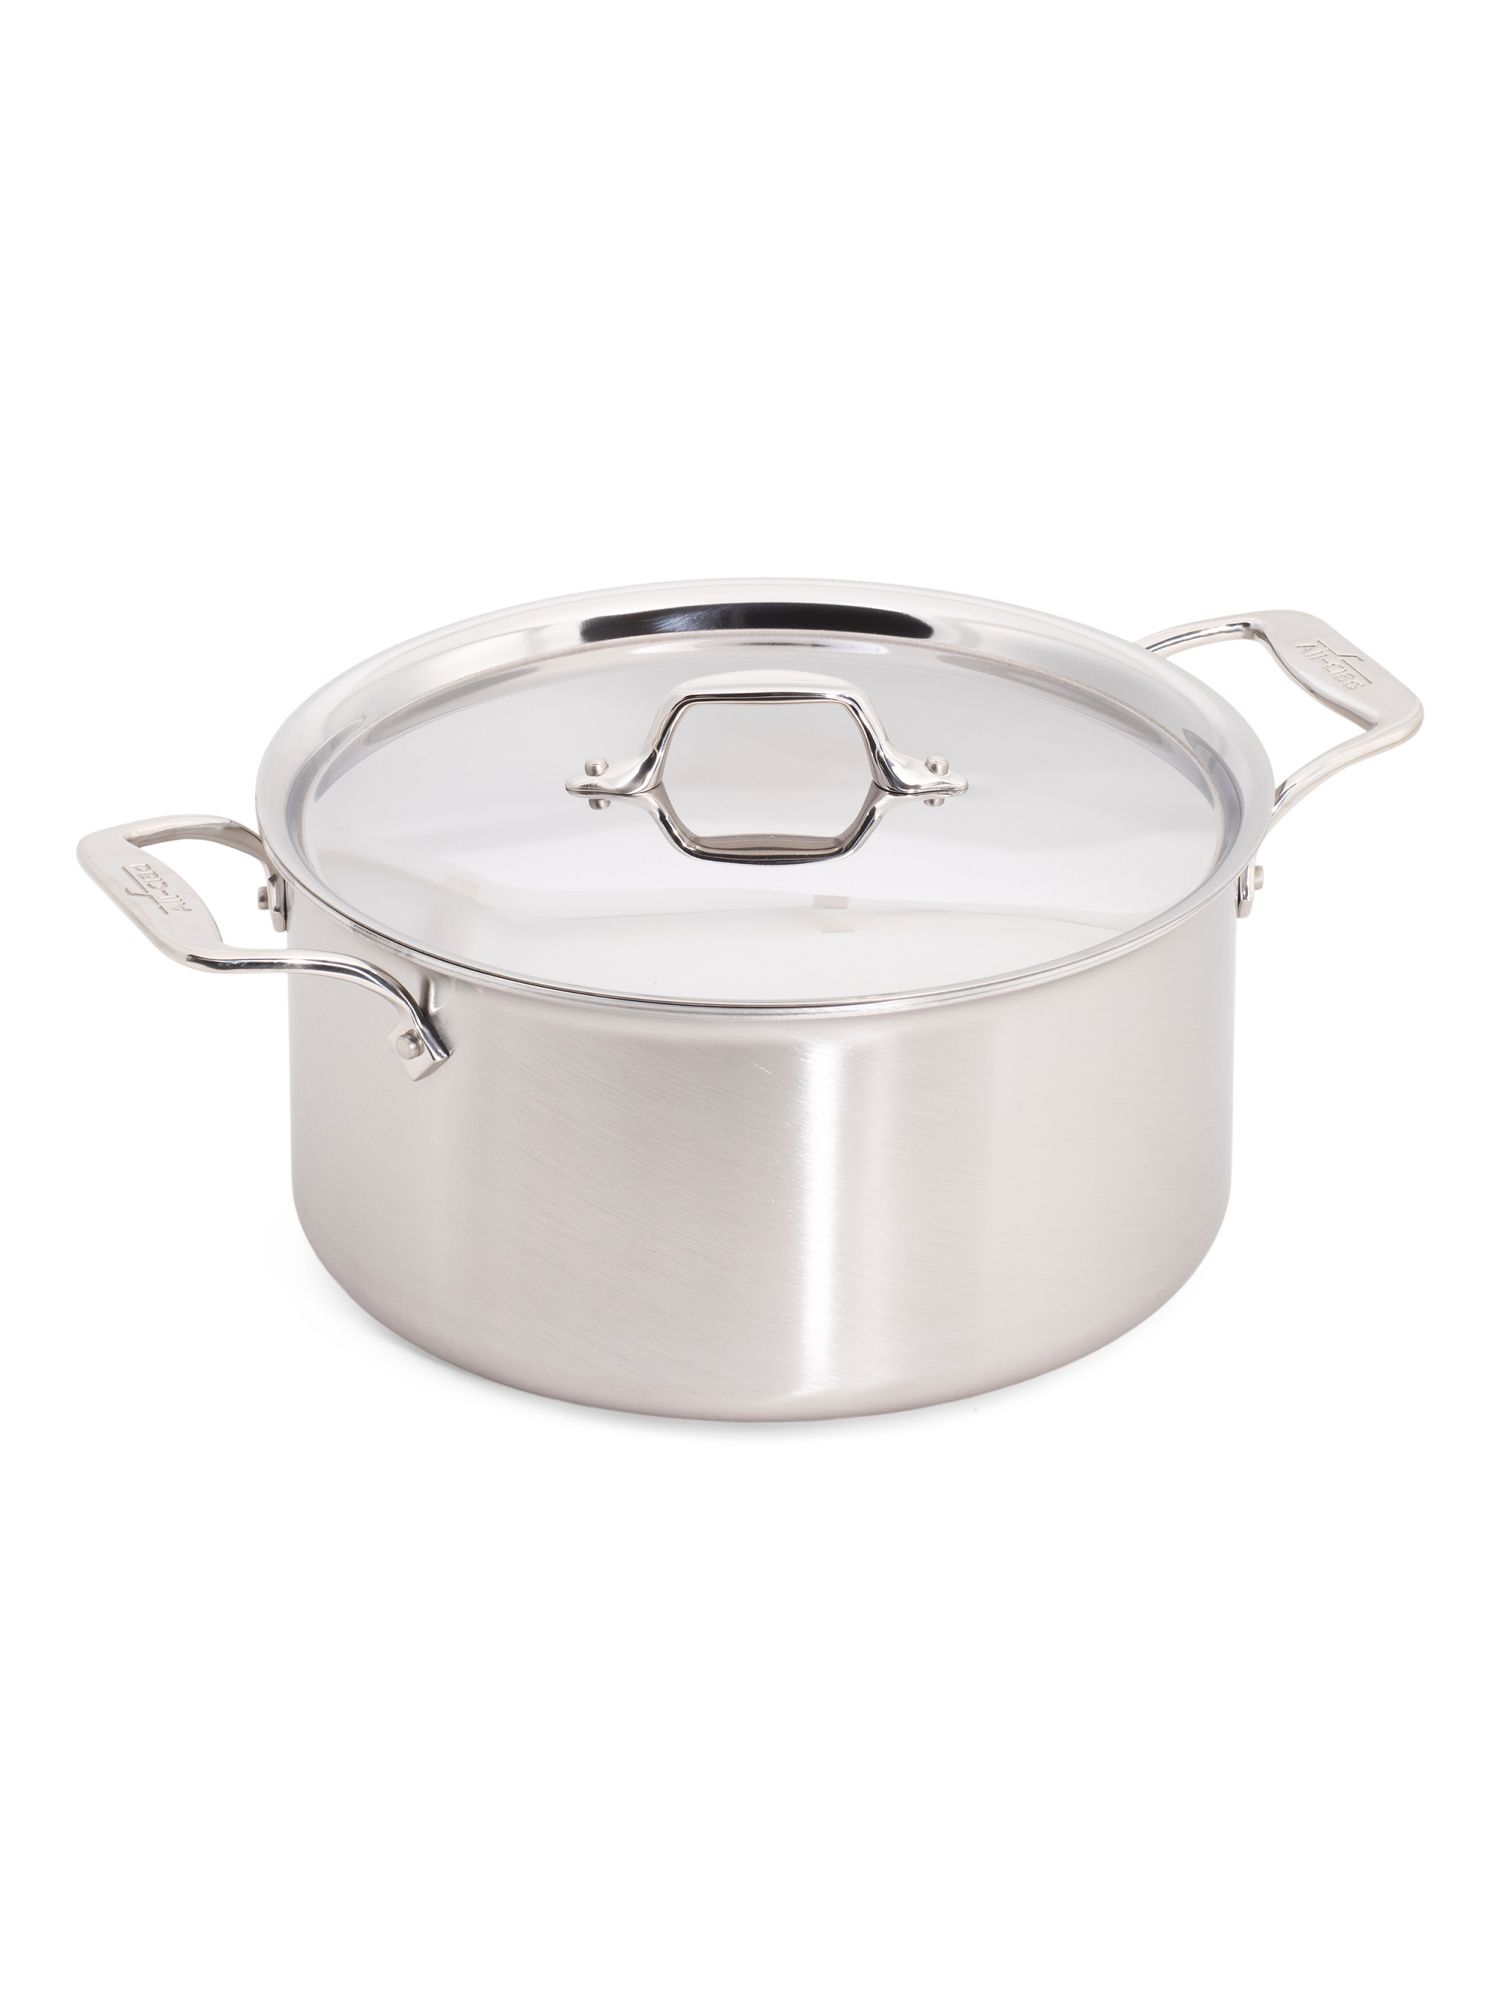 8qt Stainless Steel 5ply Stock Pot Slightly Blemished | TJ Maxx